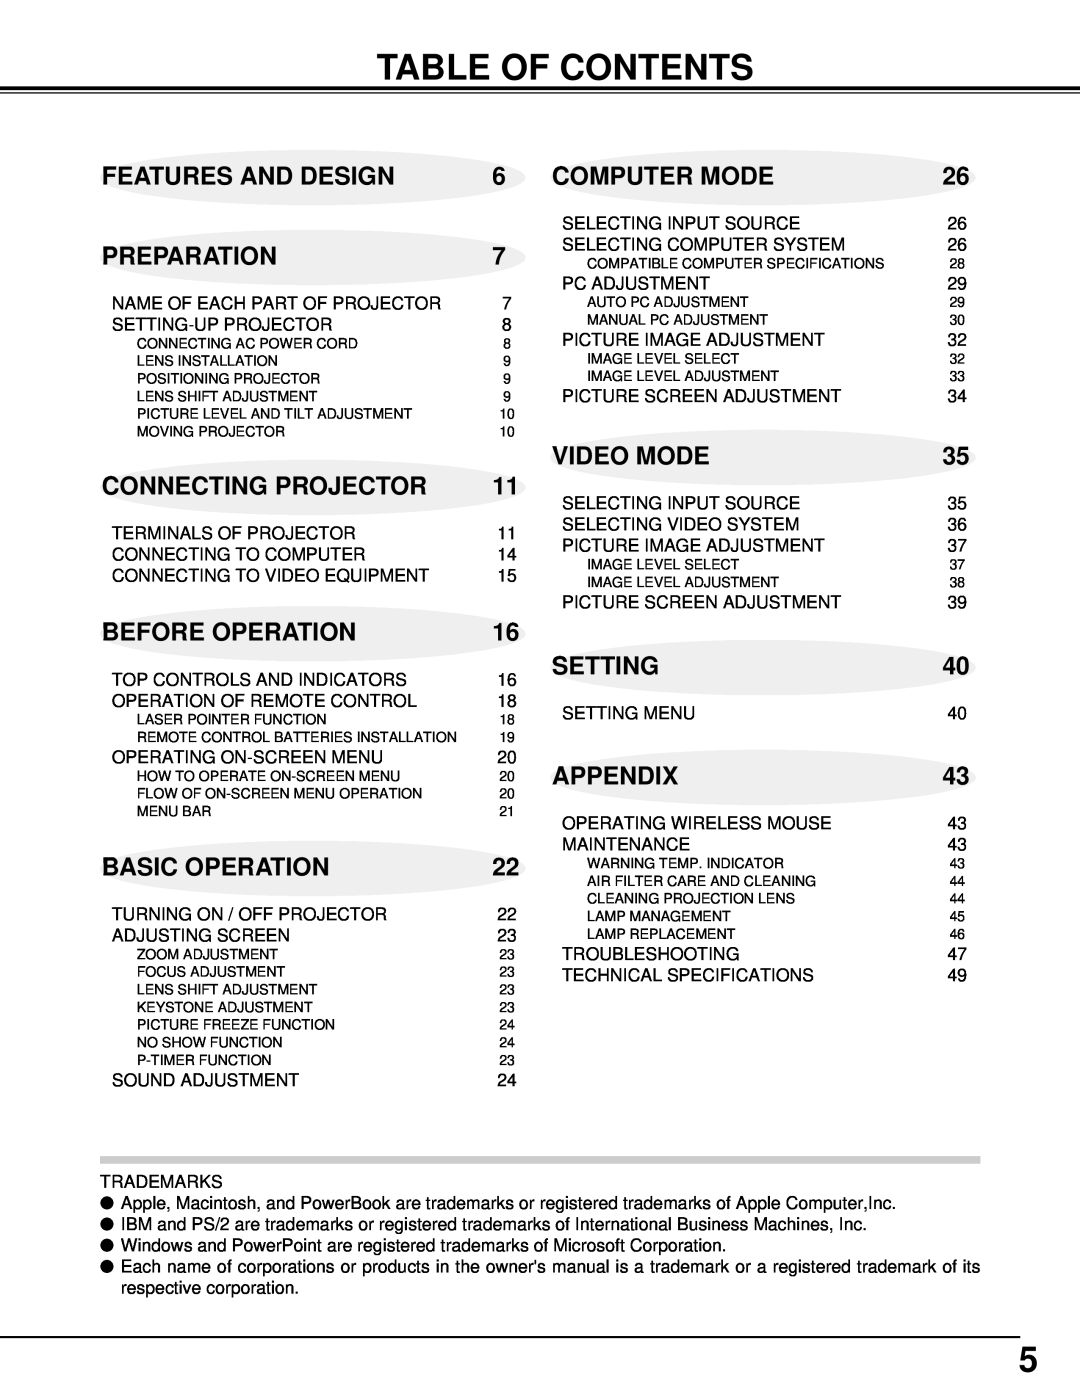 Eiki LC-UXT1 Table Of Contents, Features And Design, Computer Mode, Preparation, Connecting Projector, Video Mode, Setting 